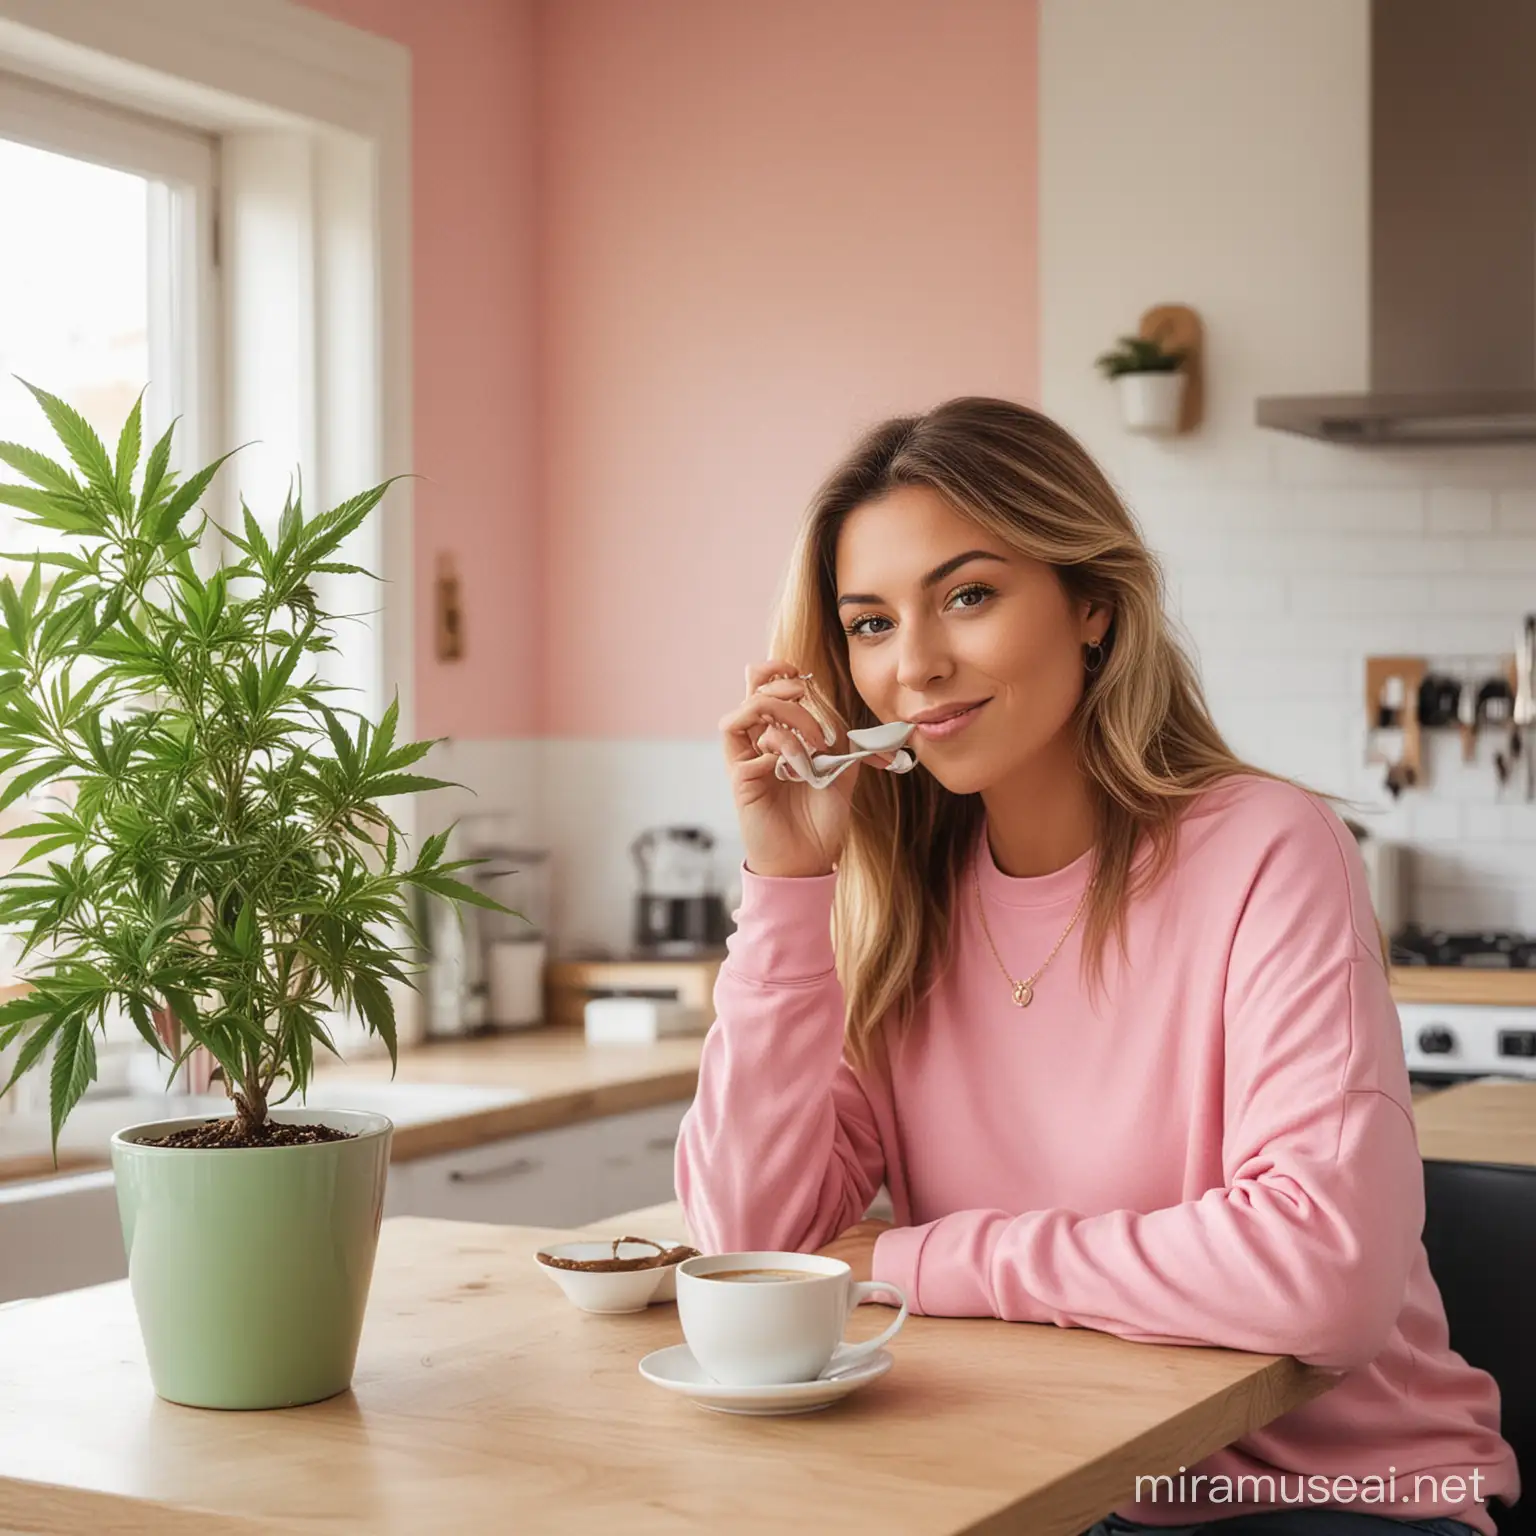 woman having coffee at kitchen table and cannabis plant in the background. incorporate bubble pink and green